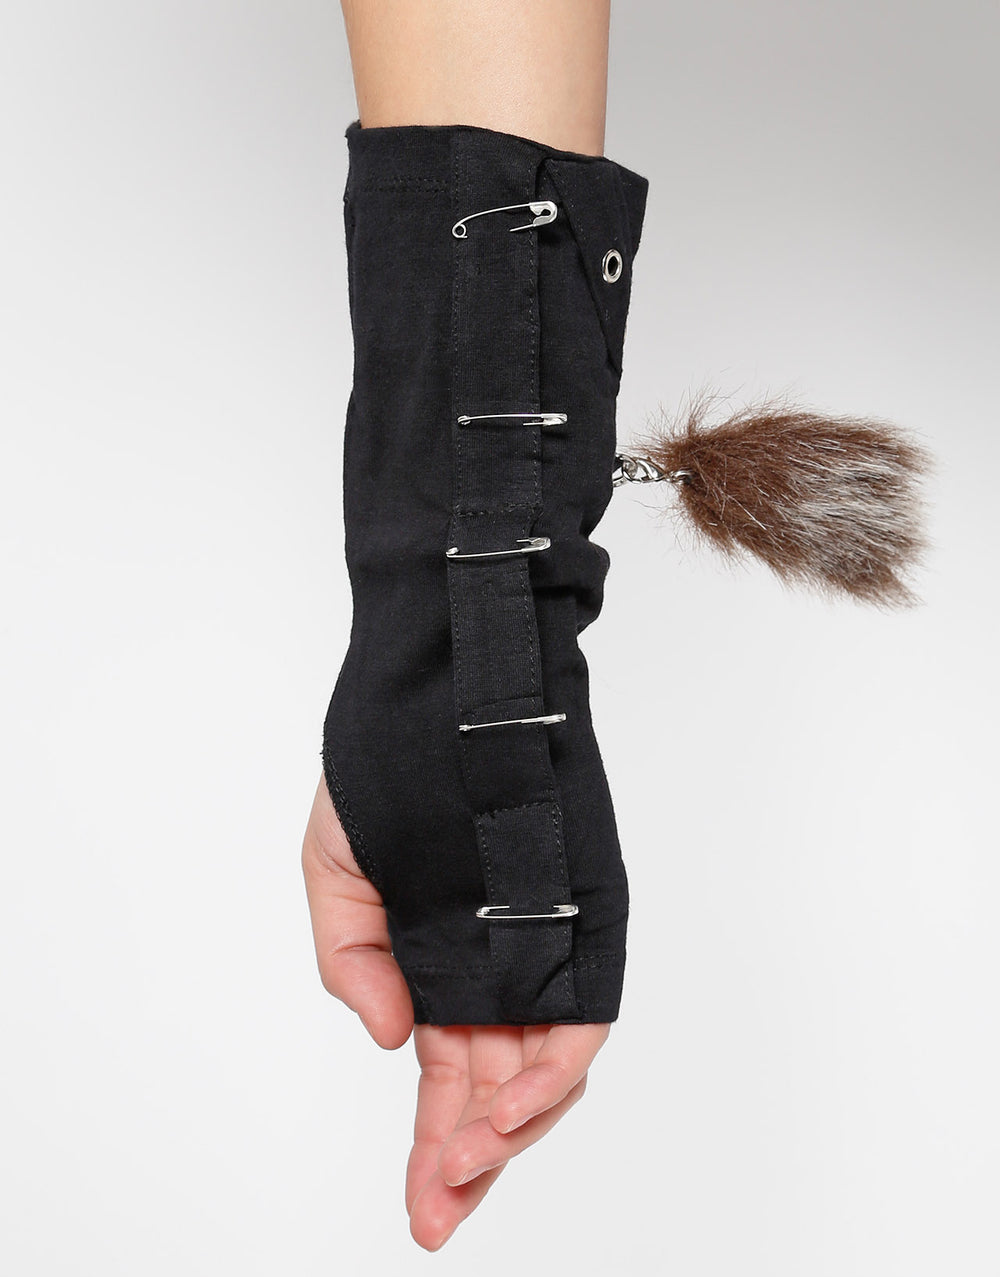 SAFETY PIN AND TAIL ARMWARMER